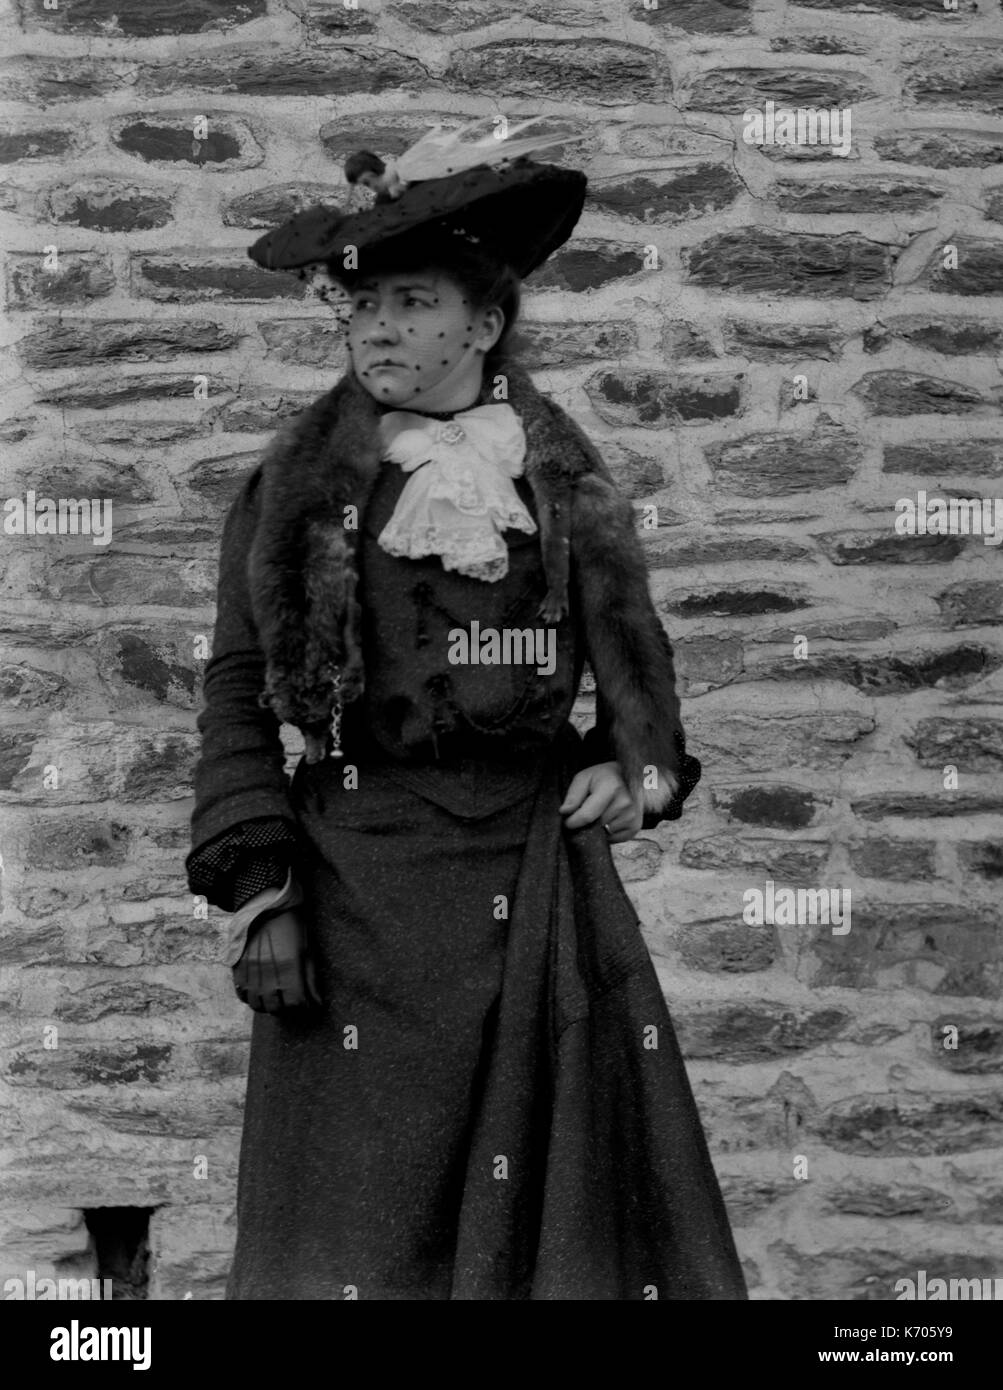 AJAXNETPHOTO. 1891-1910 (APPROX). FRANCE. - PORTRAIT OF A WOMAN WITH A HAT OUTDOORS IN A LONG DRESS. PHOTOGRAPHER:UNKNOWN © DIGITAL IMAGE COPYRIGHT AJAX VINTAGE PICTURE LIBRARY SOURCE: AJAX VINTAGE PICTURE LIBRARY COLLECTION REF:AVL FRA 1890 B29X1223 Stock Photo